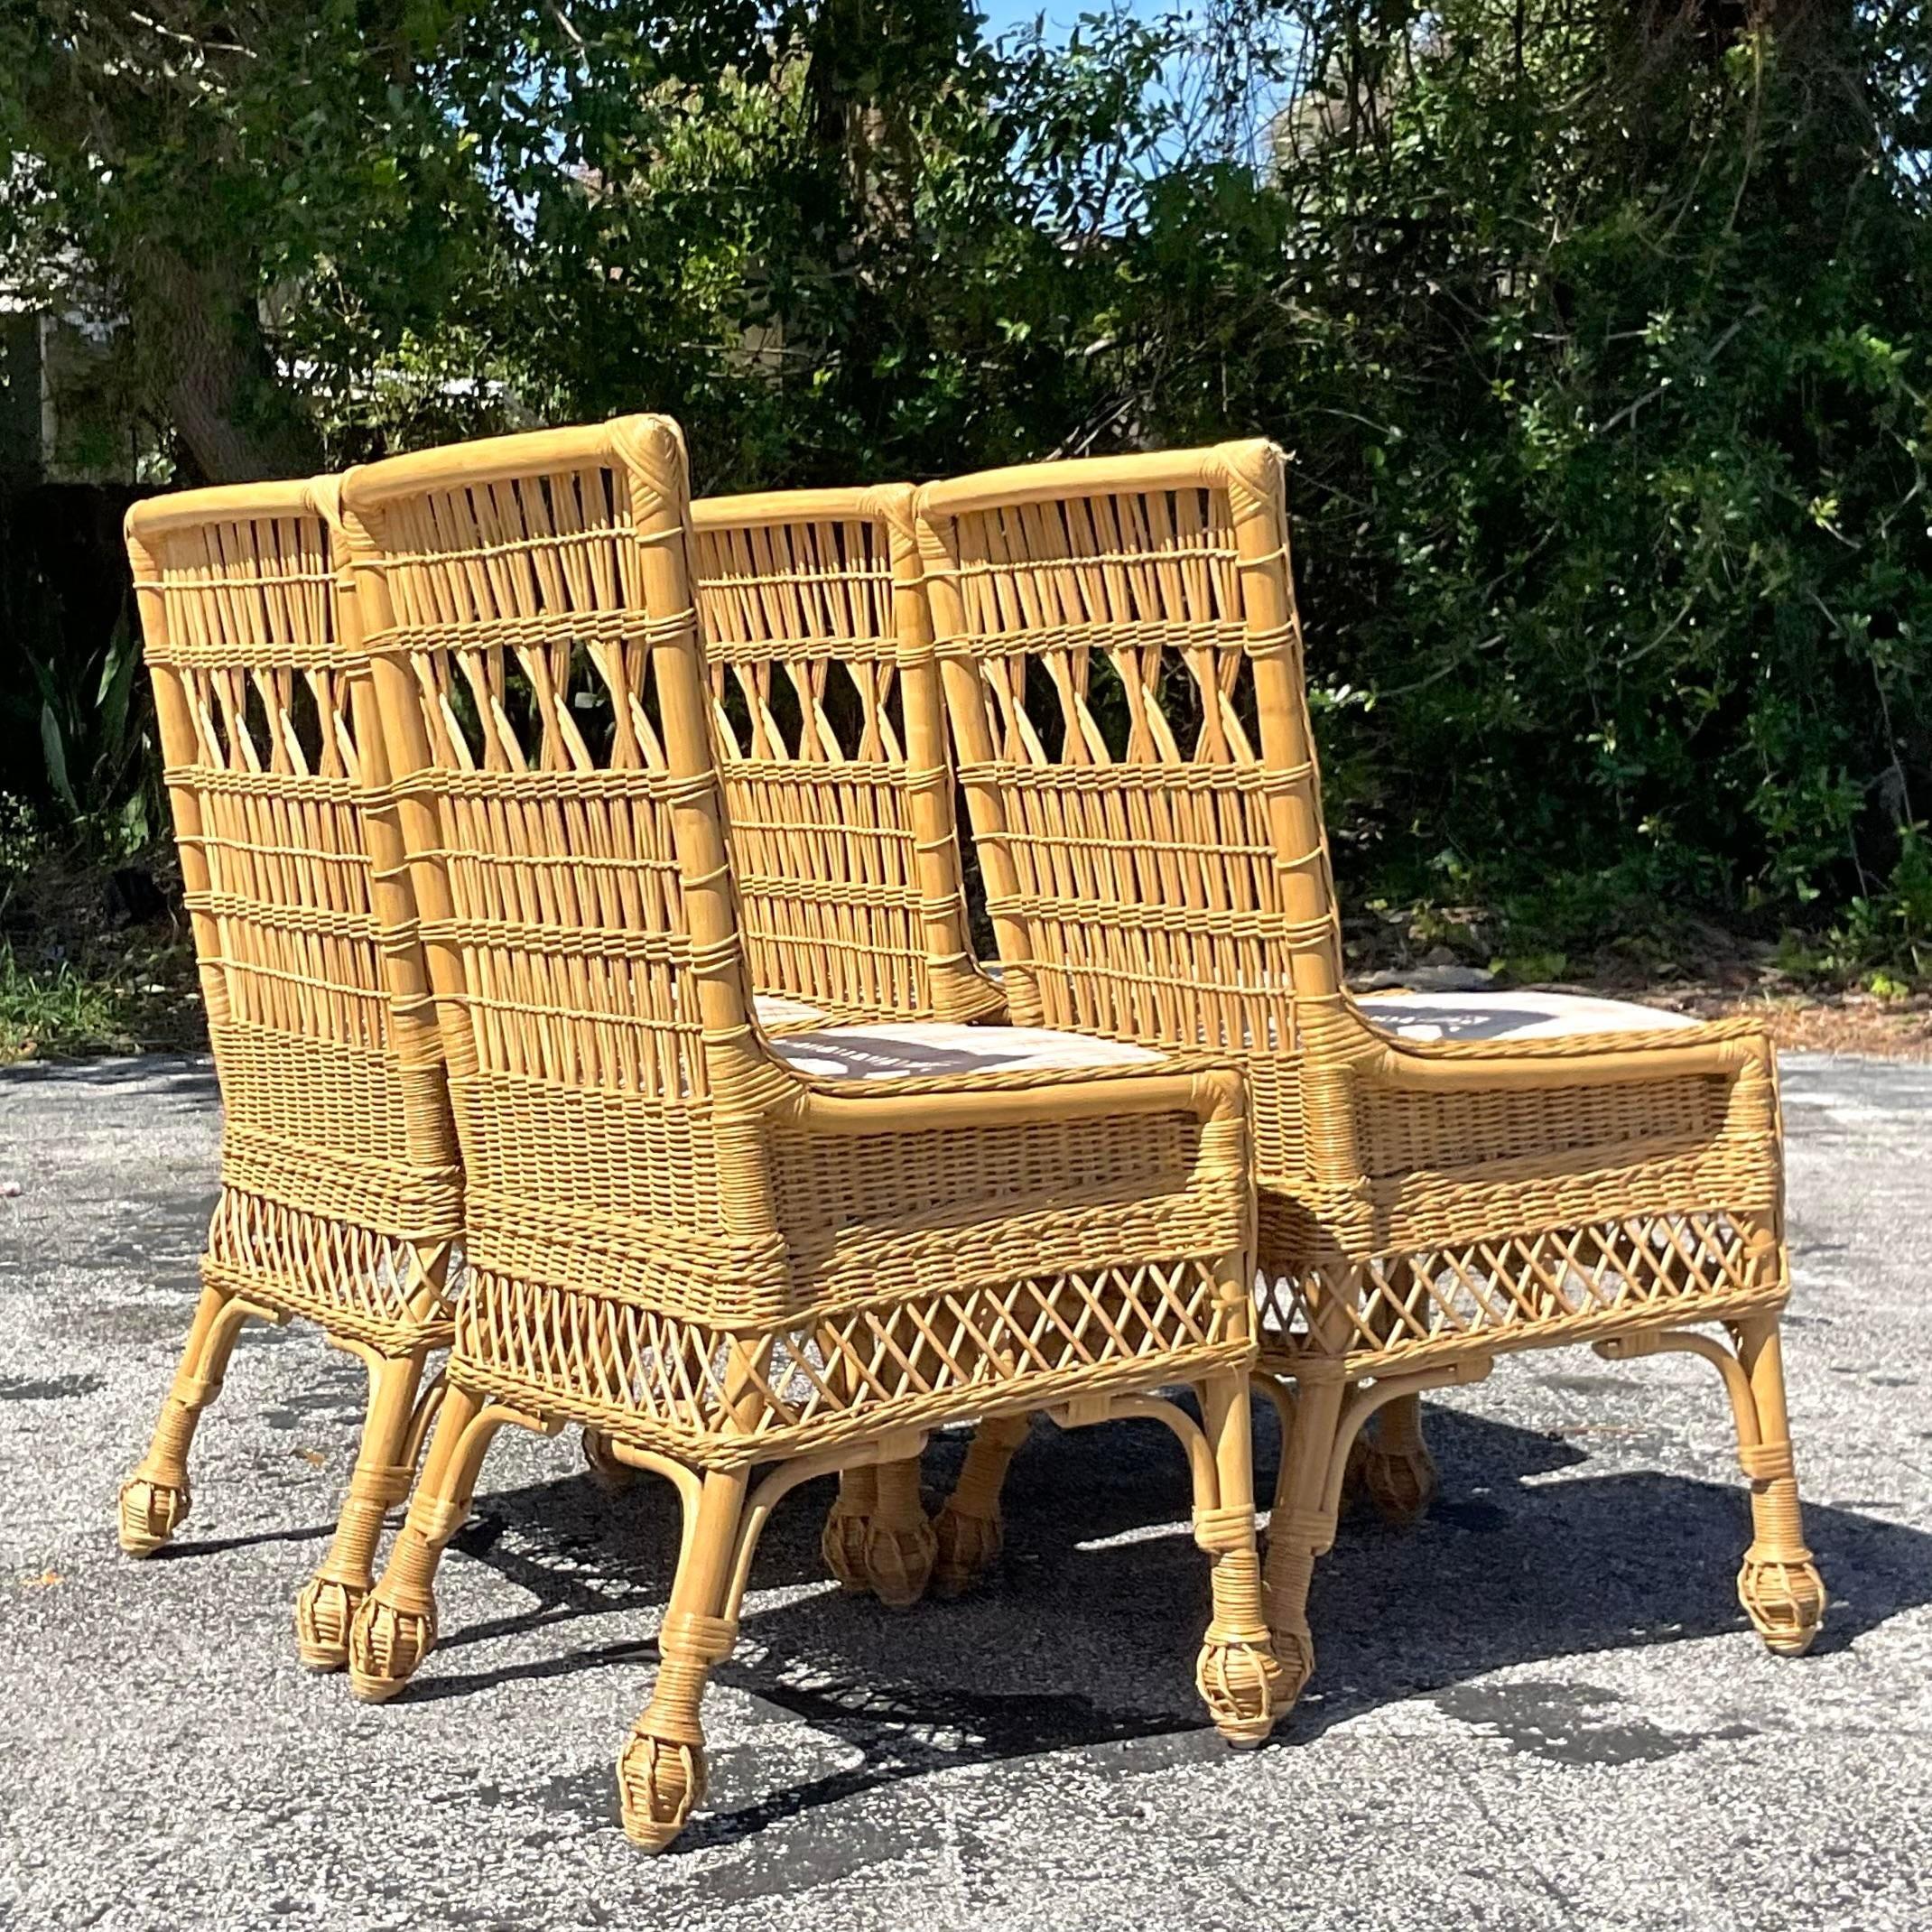 Vintage Coastal Woven Rattan Dining Chairs - Set of 4 In Good Condition For Sale In west palm beach, FL